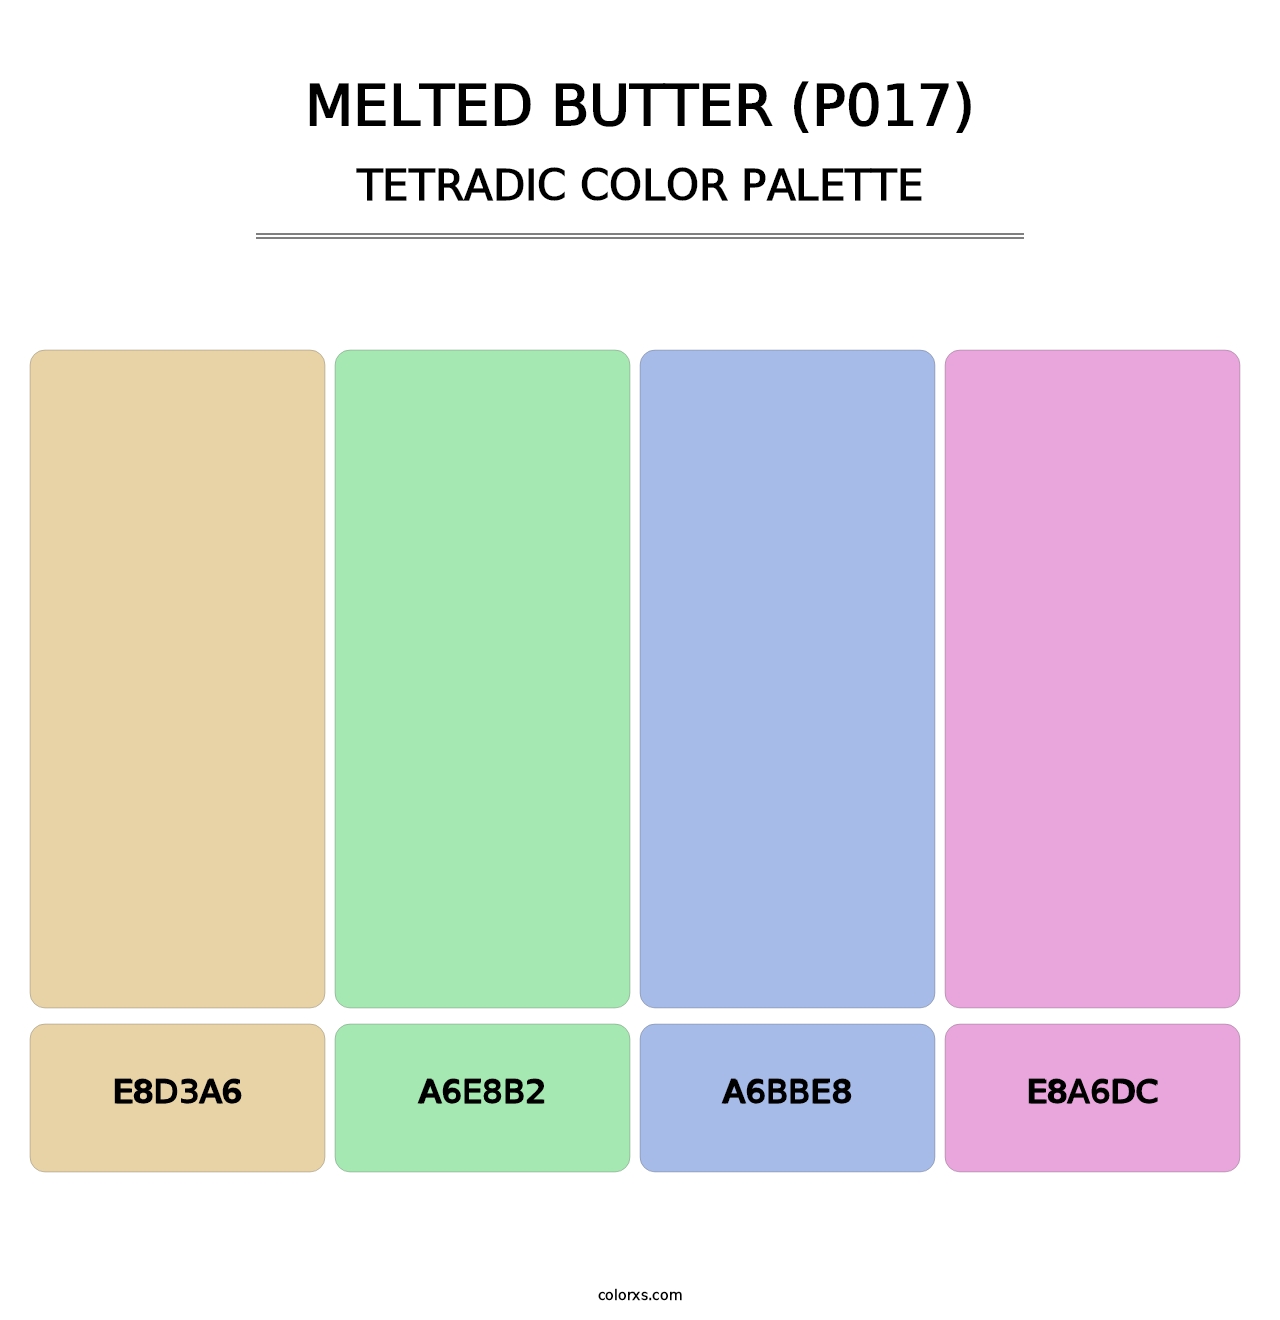 Melted Butter (P017) - Tetradic Color Palette